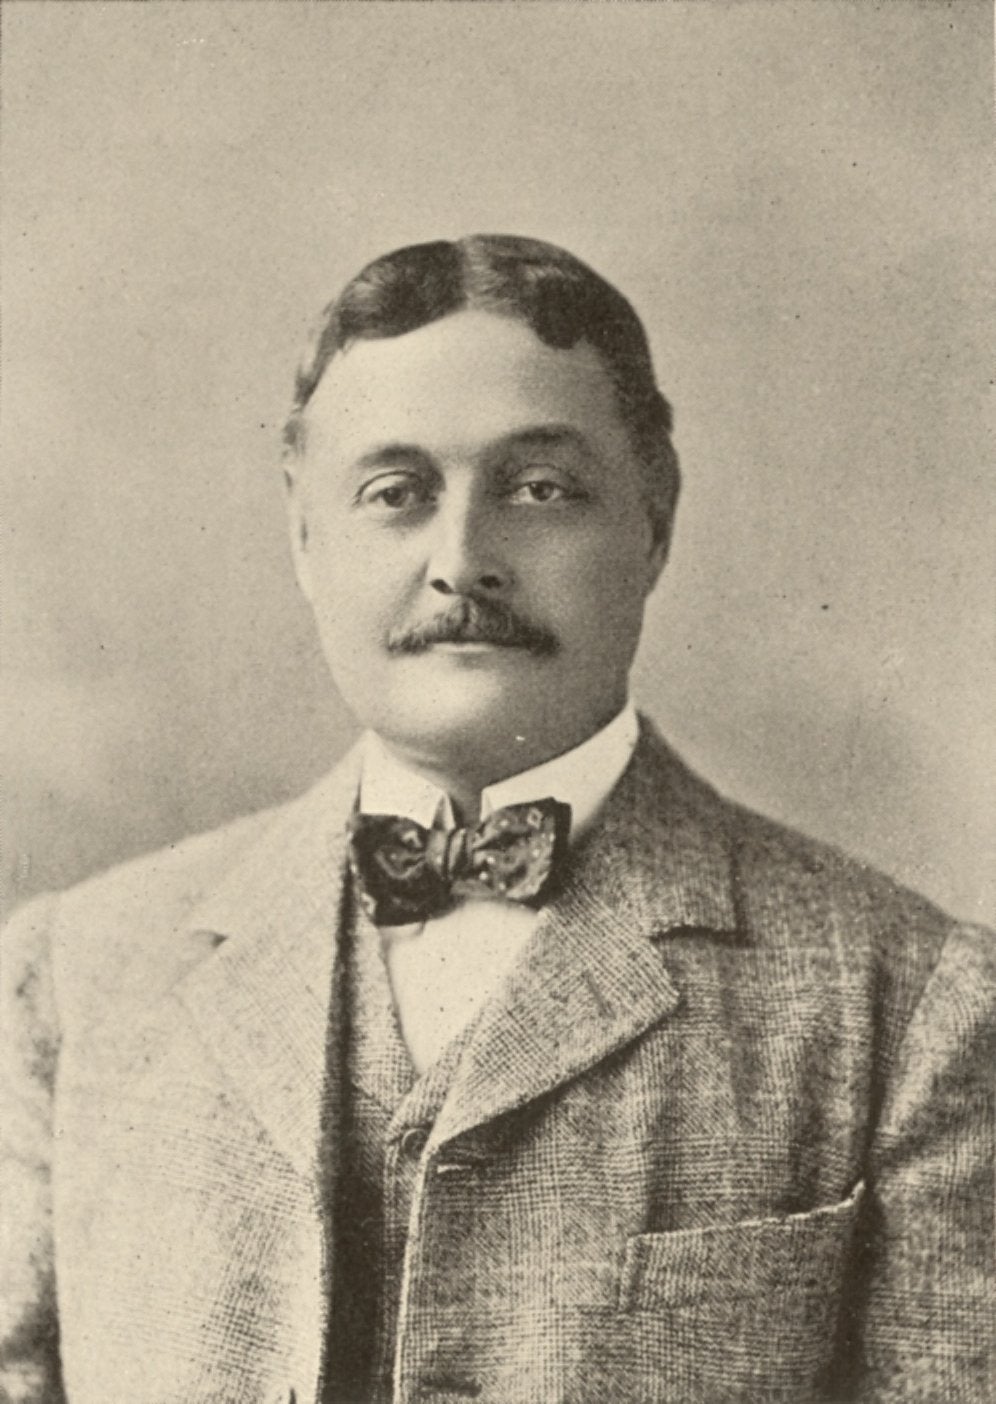 William Henry Patterson, c. 1900